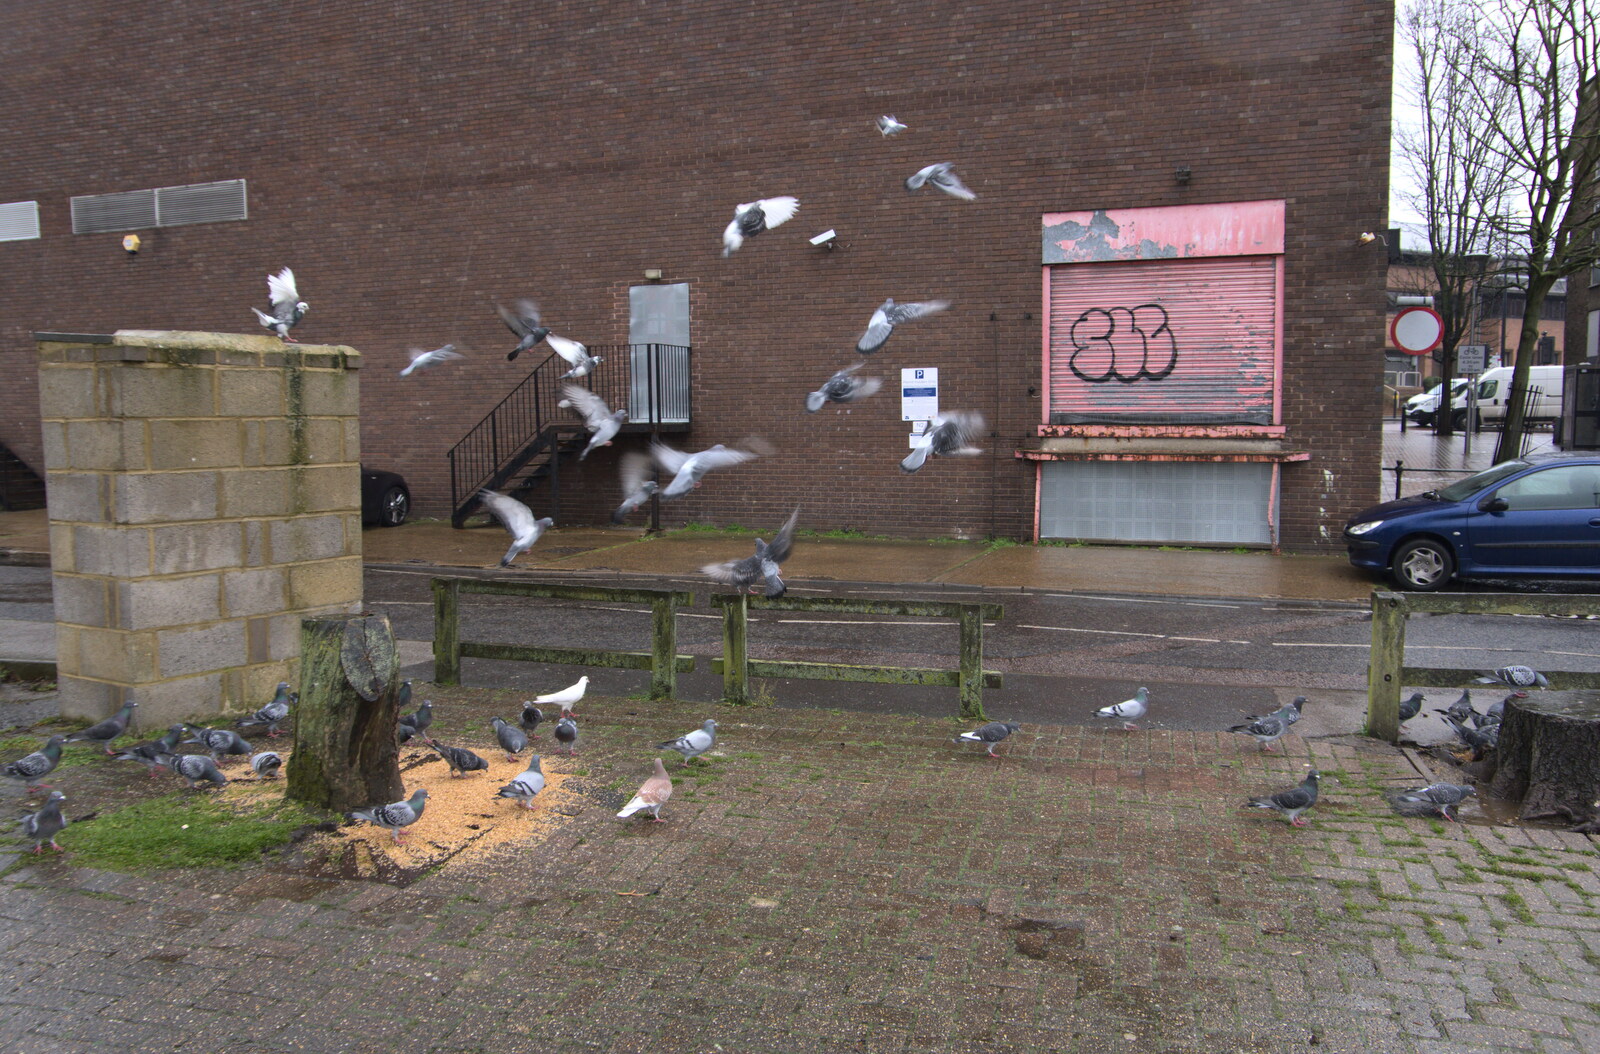 Pigeons explode into the sky from Fred's Flute Exam, Ipswich, Suffolk - 5th March 2020